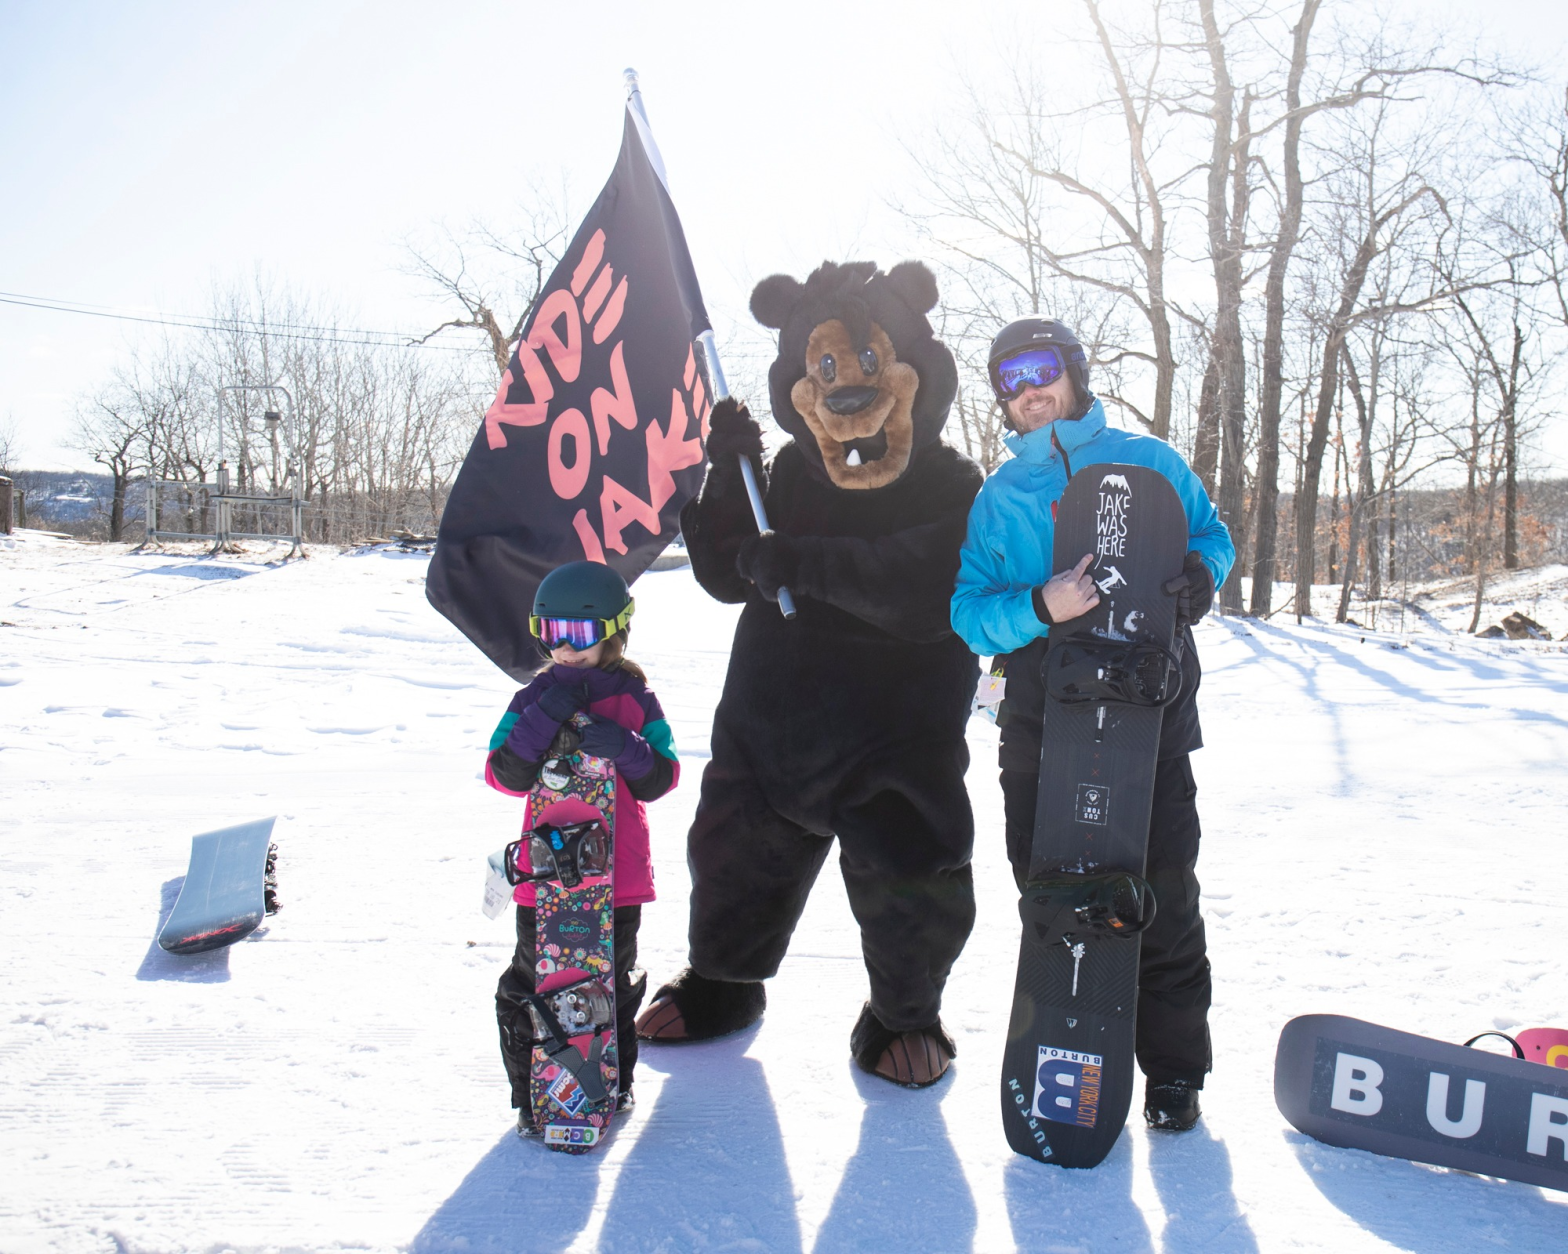 Vern Posing with two snowboarders at Mountain Creek in Vernon New Jersey